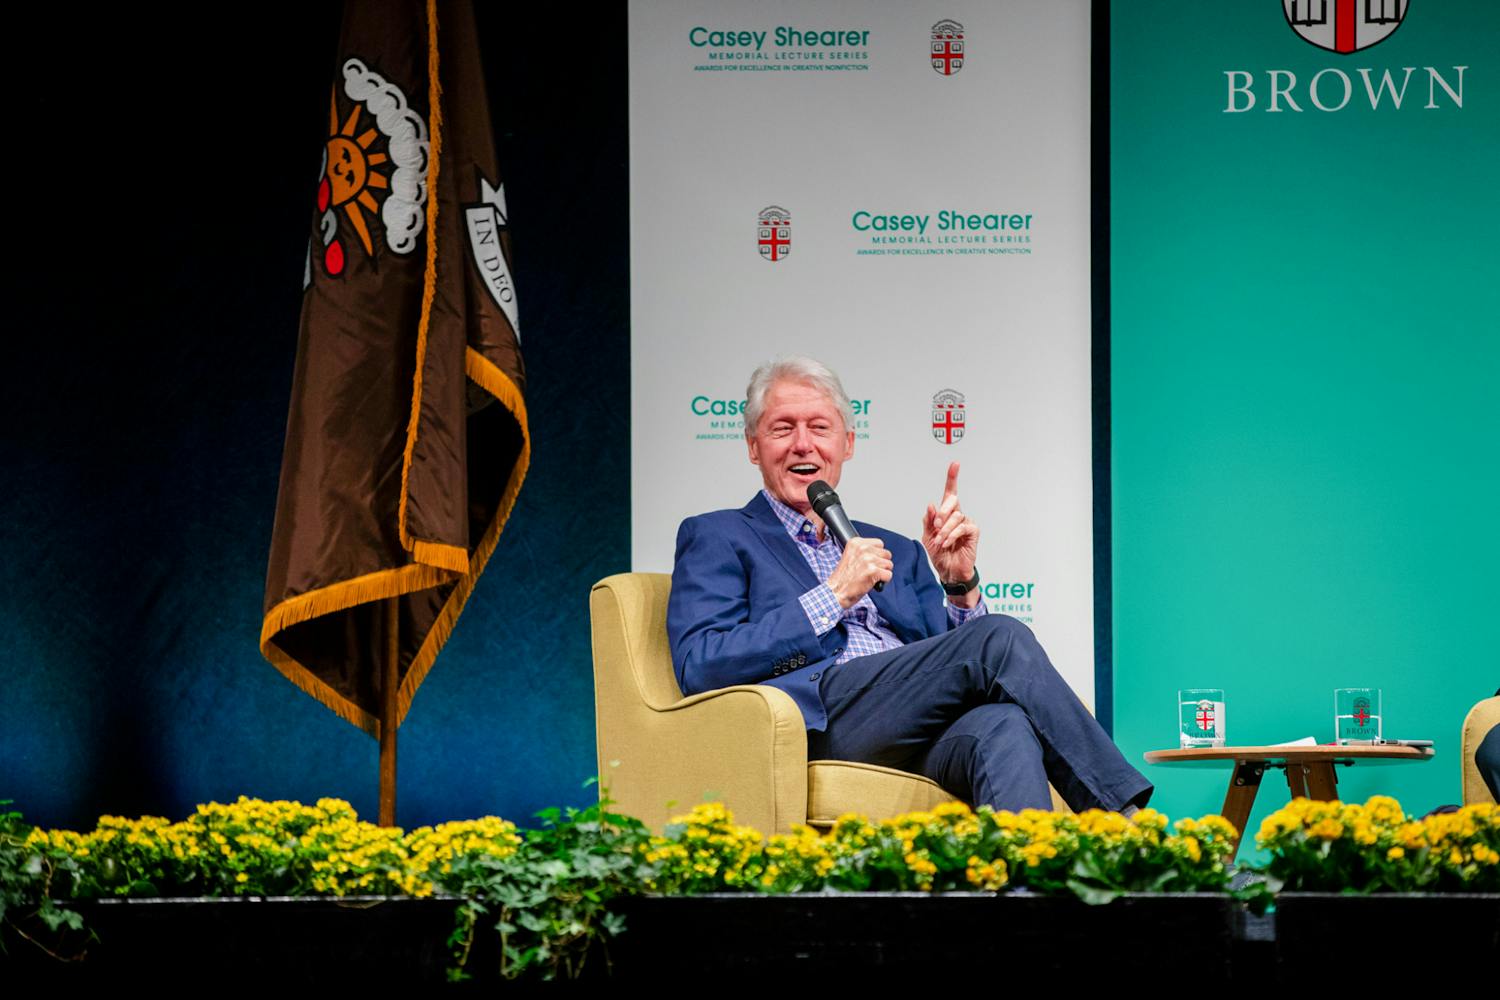 Former U.S. President Bill Clinton spoke with Derek Shearer about current political issues, his own personal interests and gave career advice to future generations.